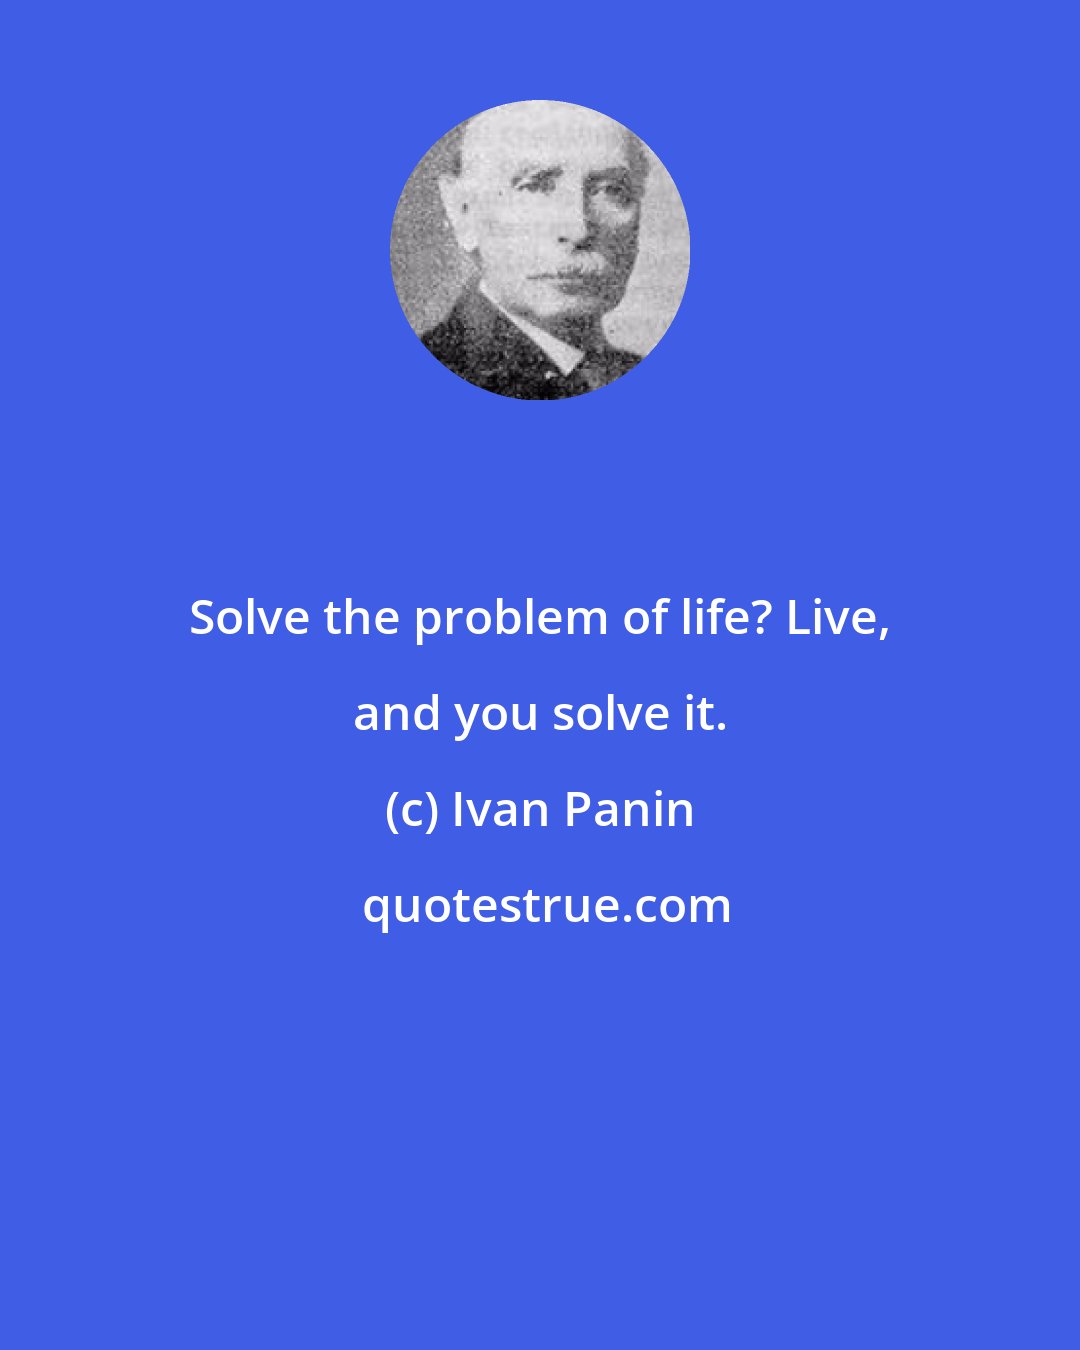 Ivan Panin: Solve the problem of life? Live, and you solve it.